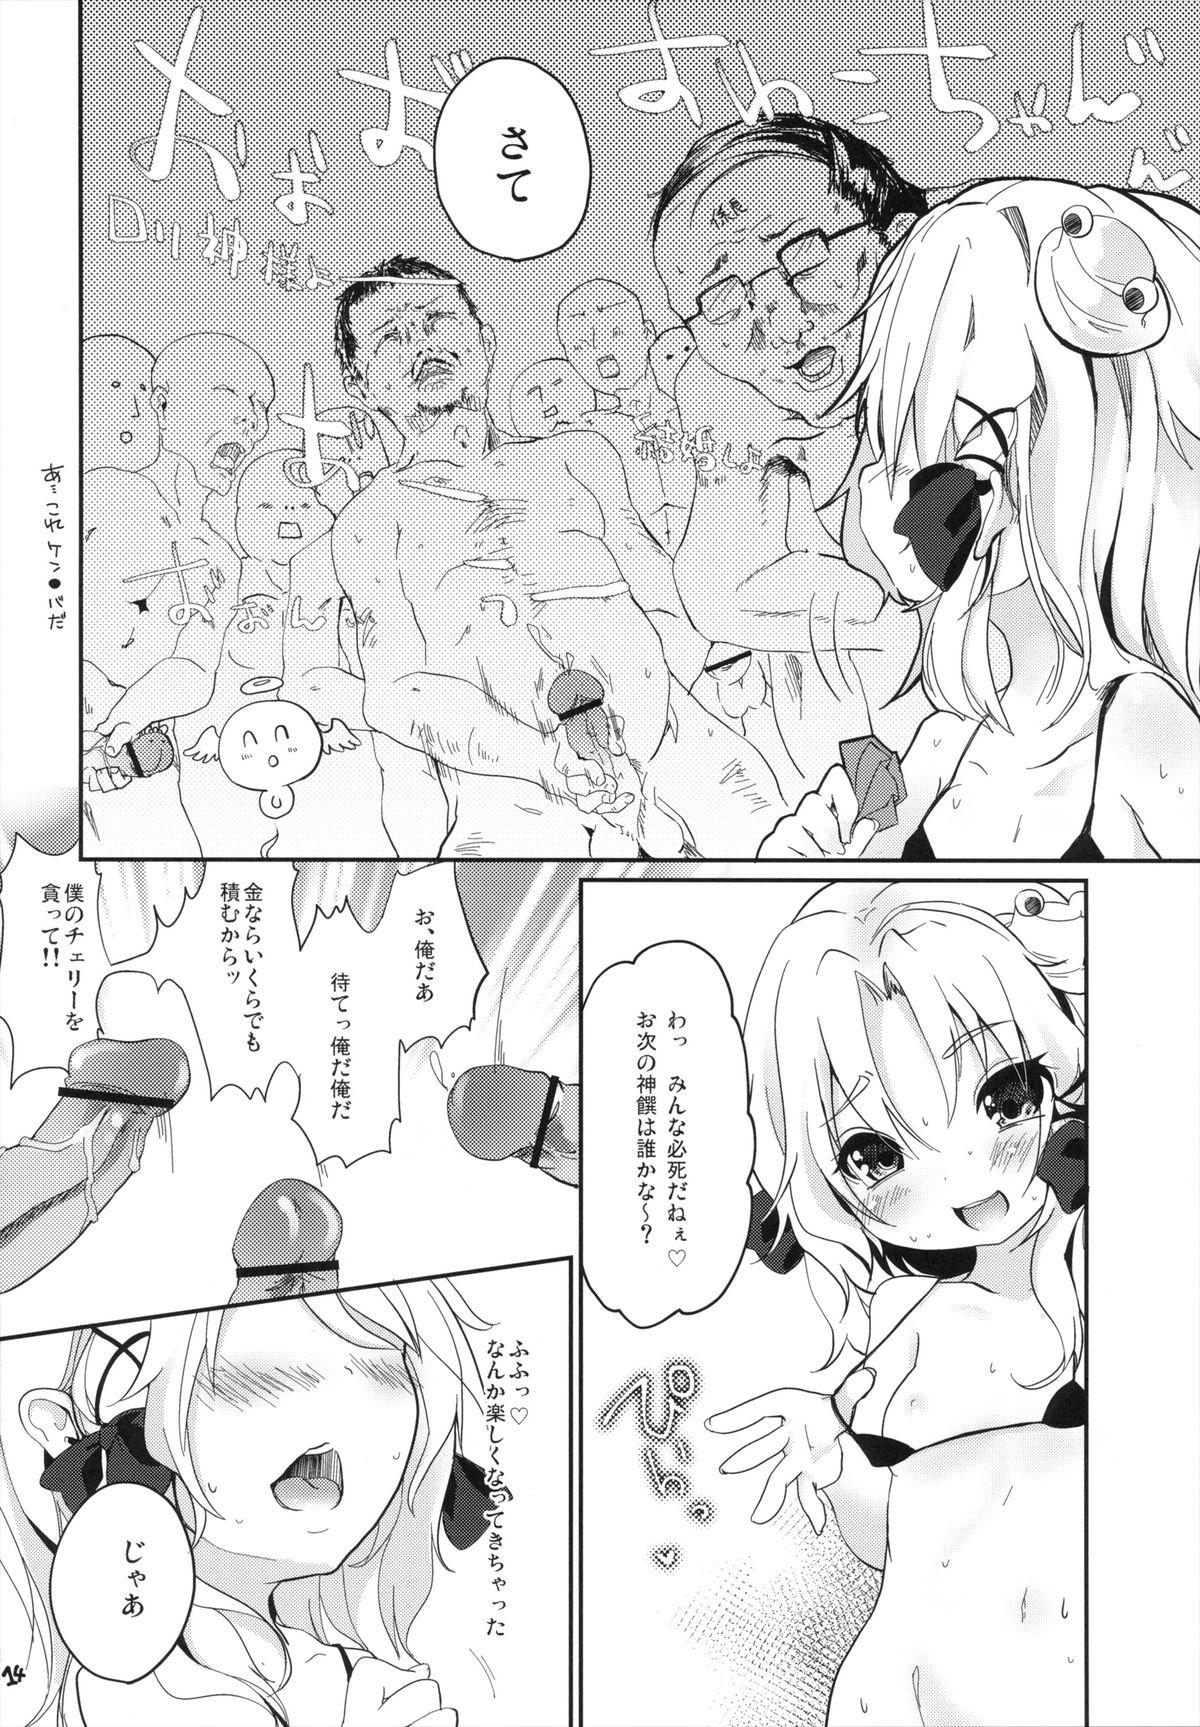 Tiny Tits Porn Shinkou Material - Touhou project Gagging - Page 13